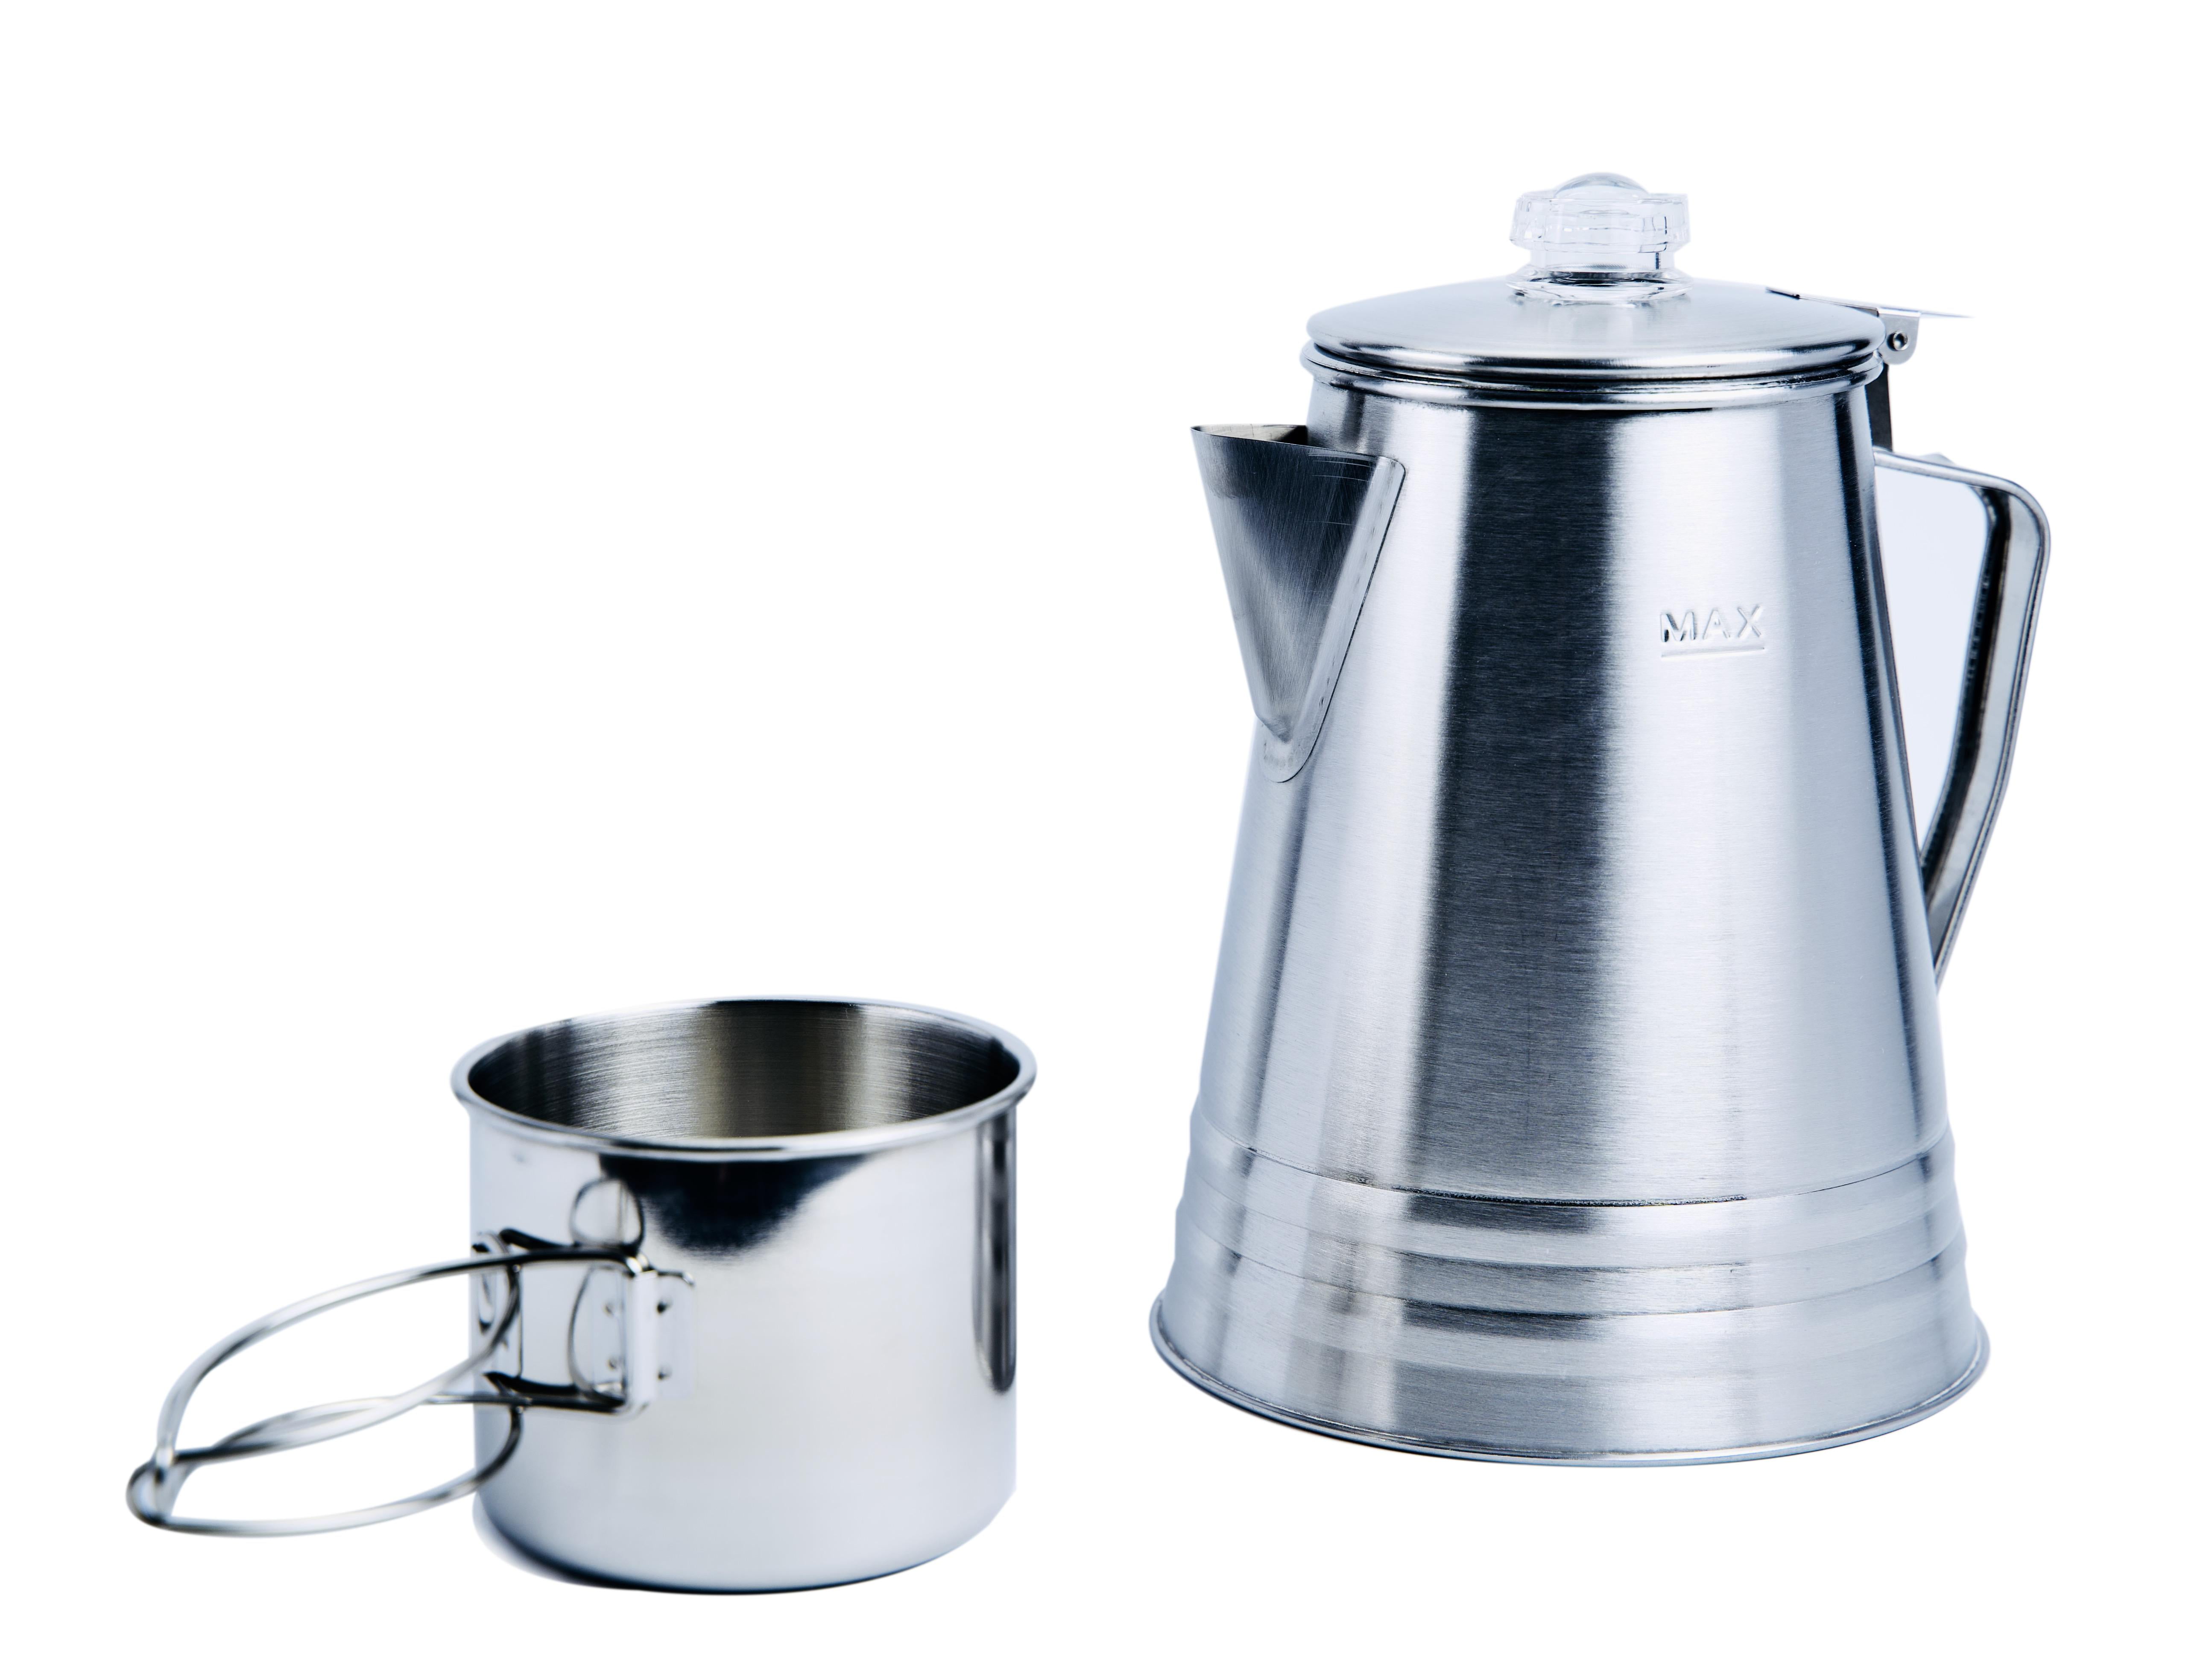  Oregon Trail - 10 Cup Stainless Steel Percolator